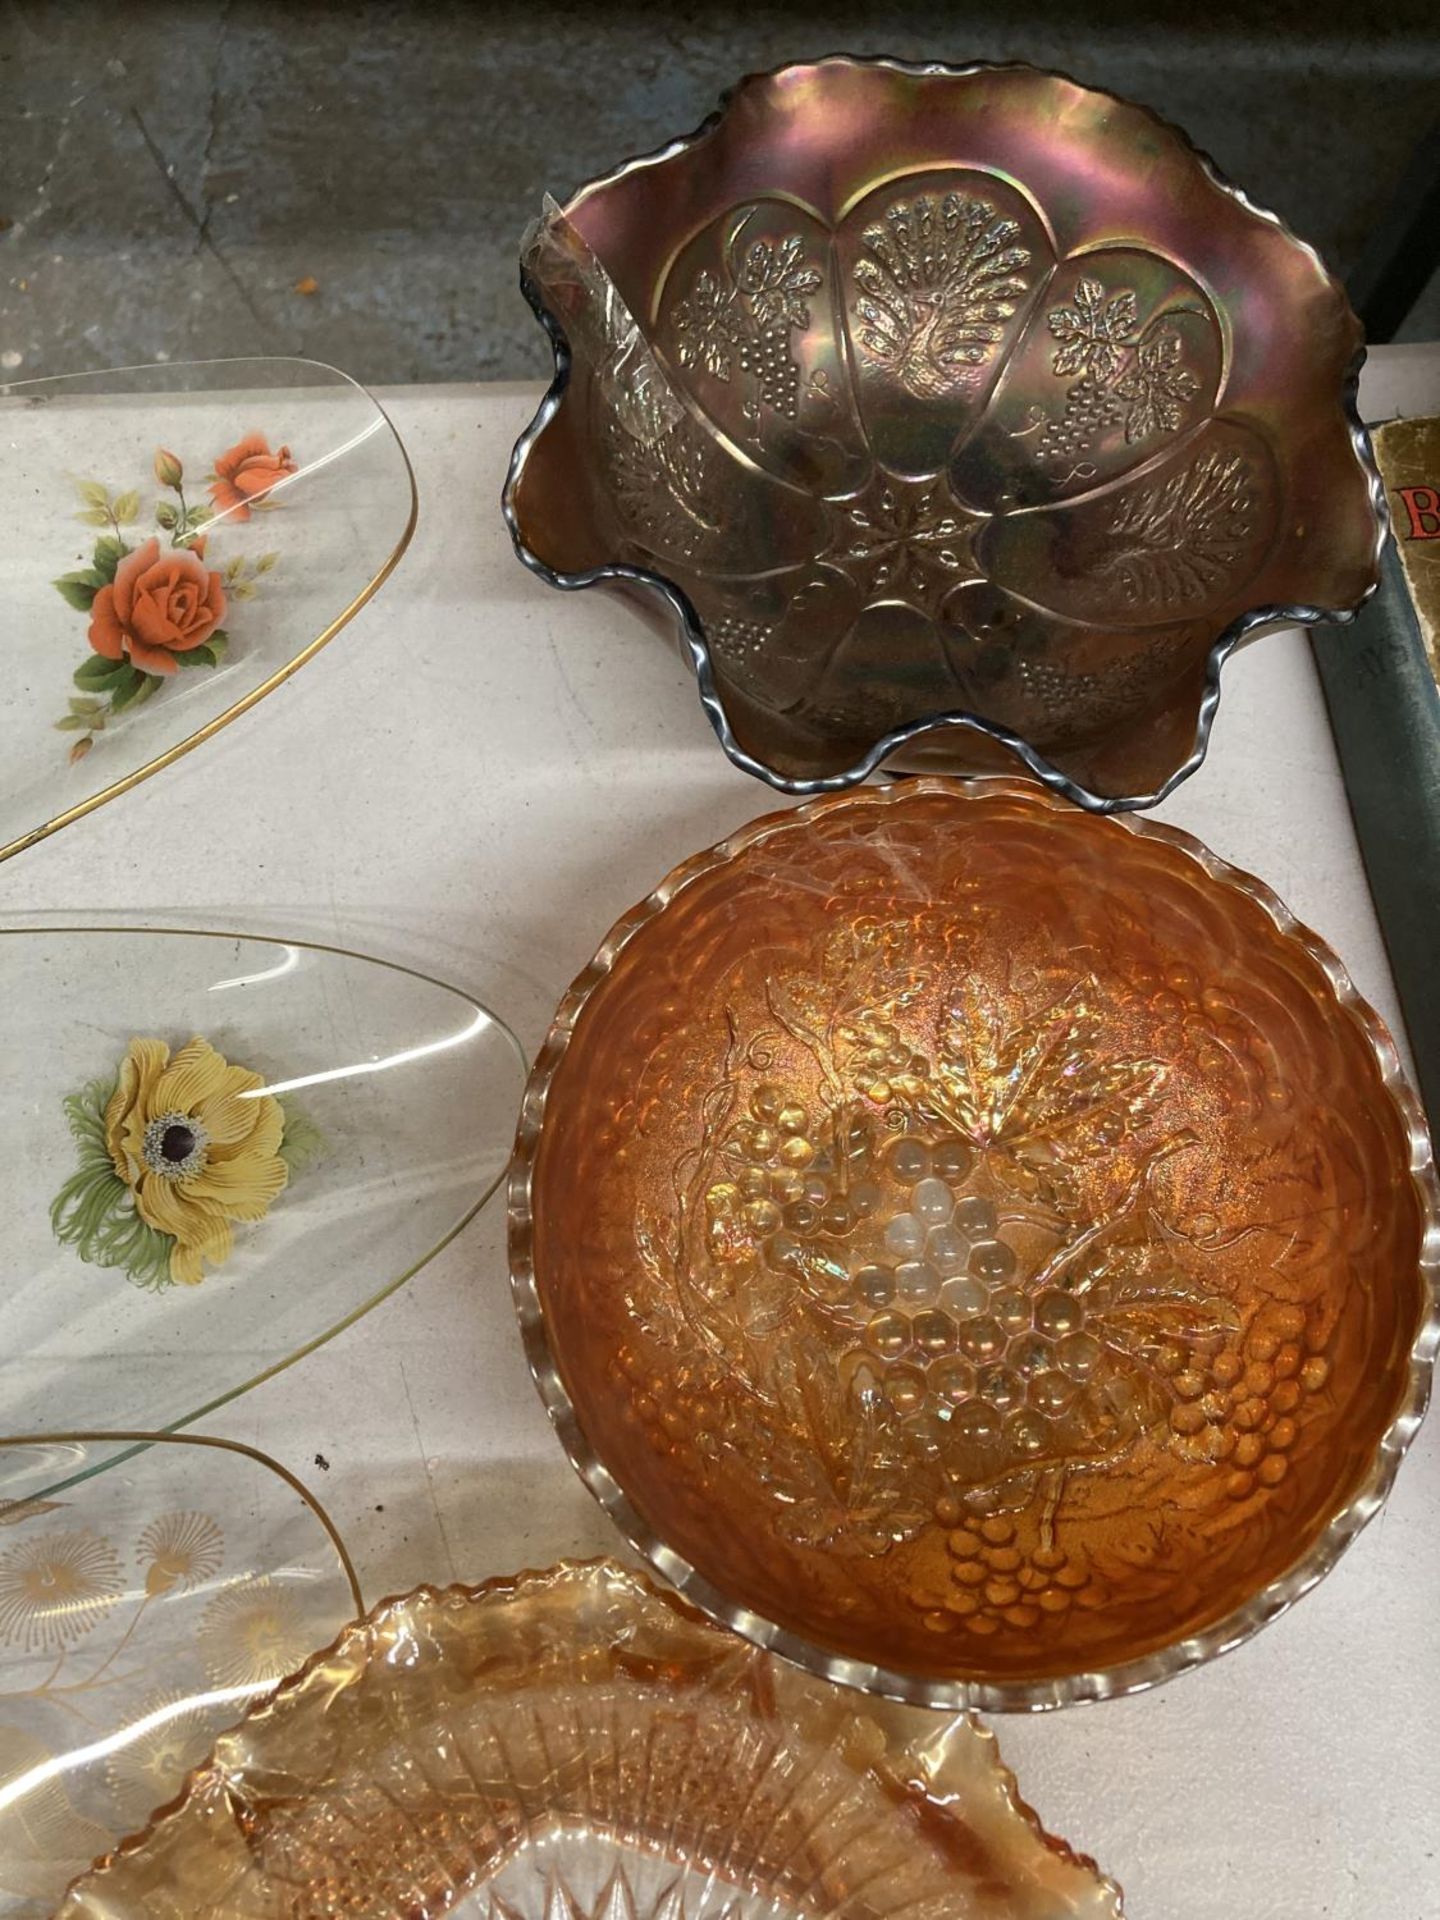 A QUANTITY OF GLASSWARE TO INCLUDE FLORAL PRINTED SERVING PLATES AND CARNIVAL GLASS BOWLS - Image 4 of 6